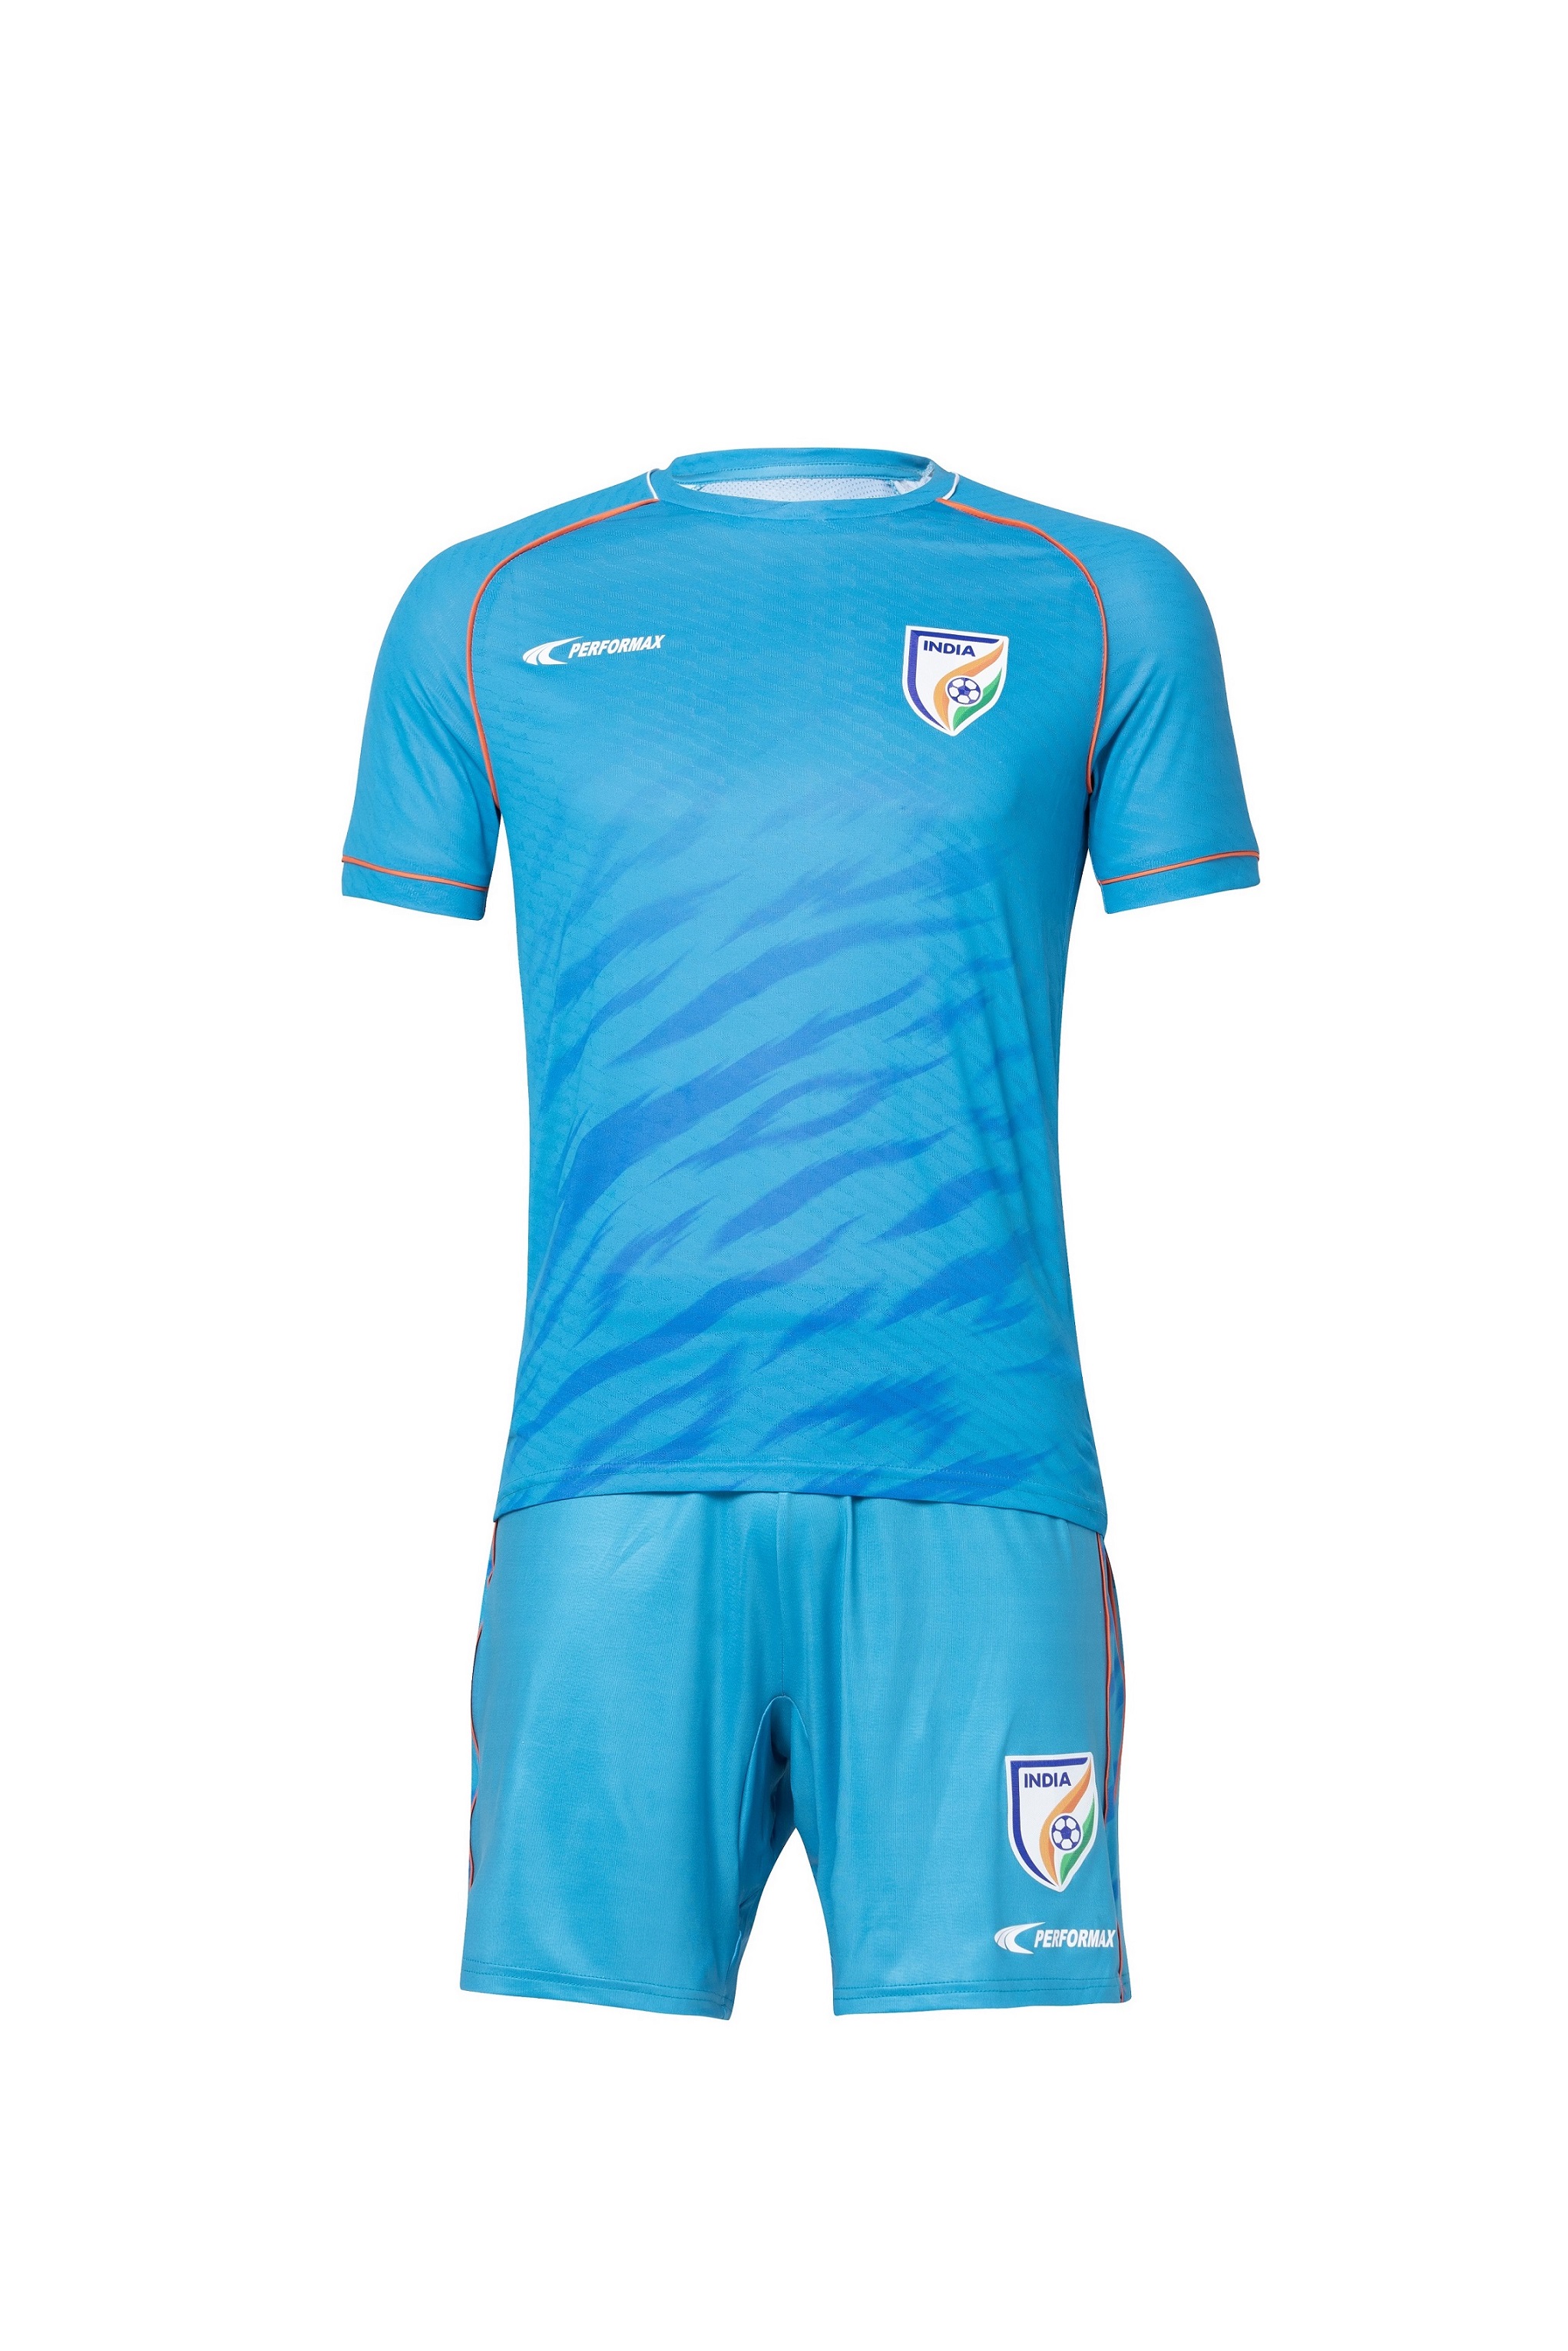 Reliance Retail’s Performax Activewear as official kit sponsor for Indian football team